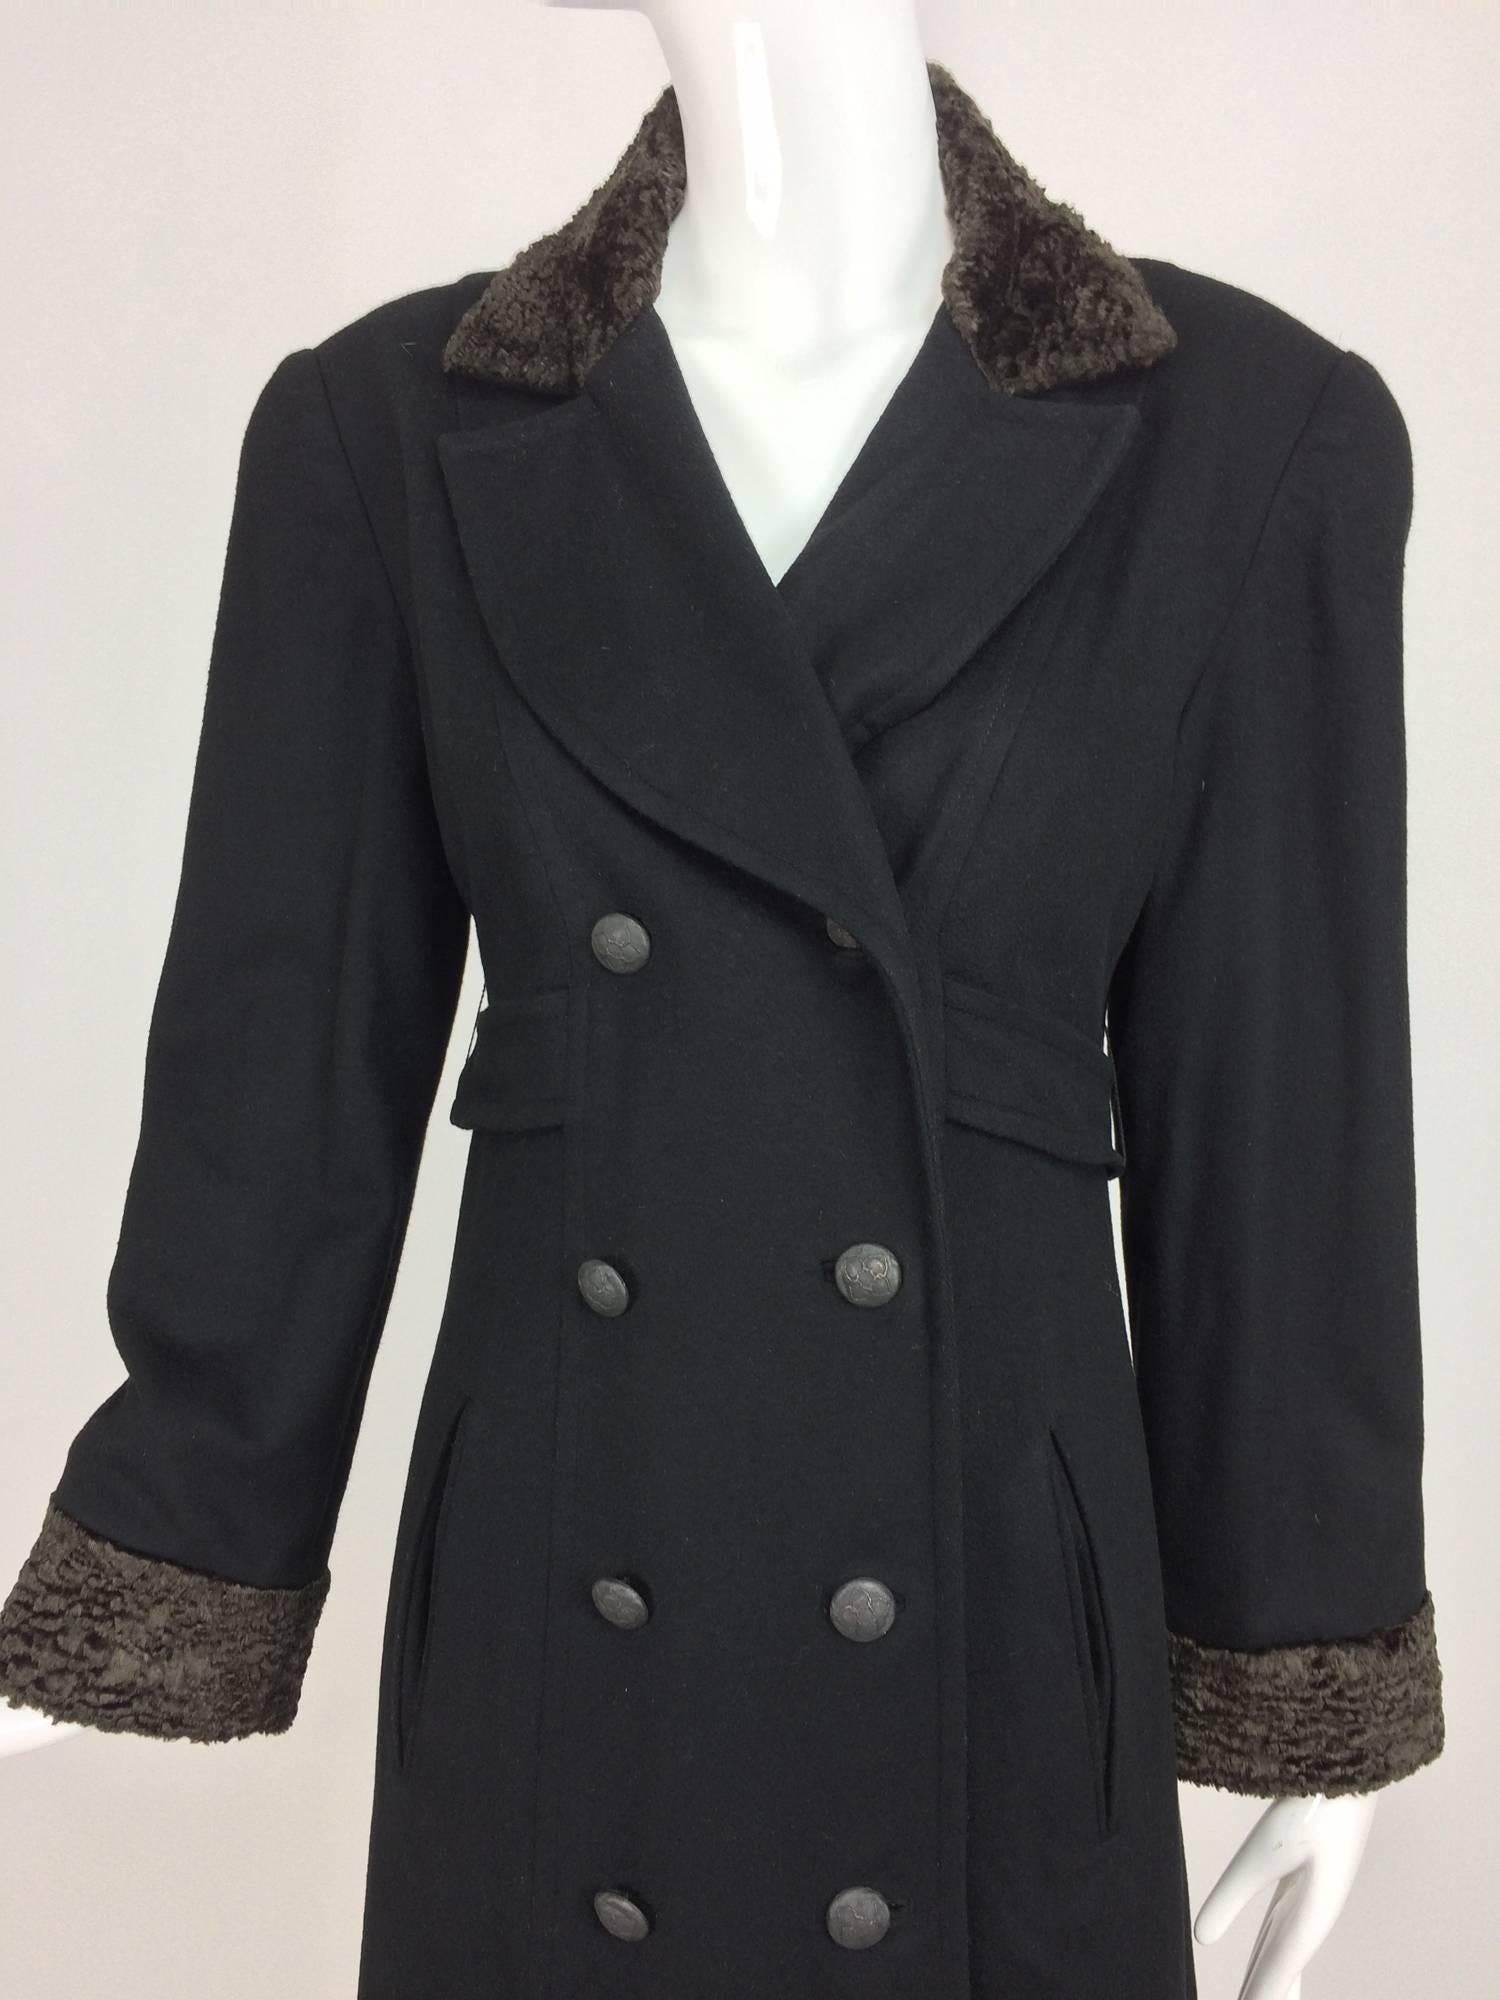 Vintage Zelda Military inspired double breasted black 100% cashmere coat...Soft black cashmere coat has curved lapels, faux fur collar and cuffs, double breasted closes with decorative metal buttons...Figure defining 1/2 belt at the waist...Fully